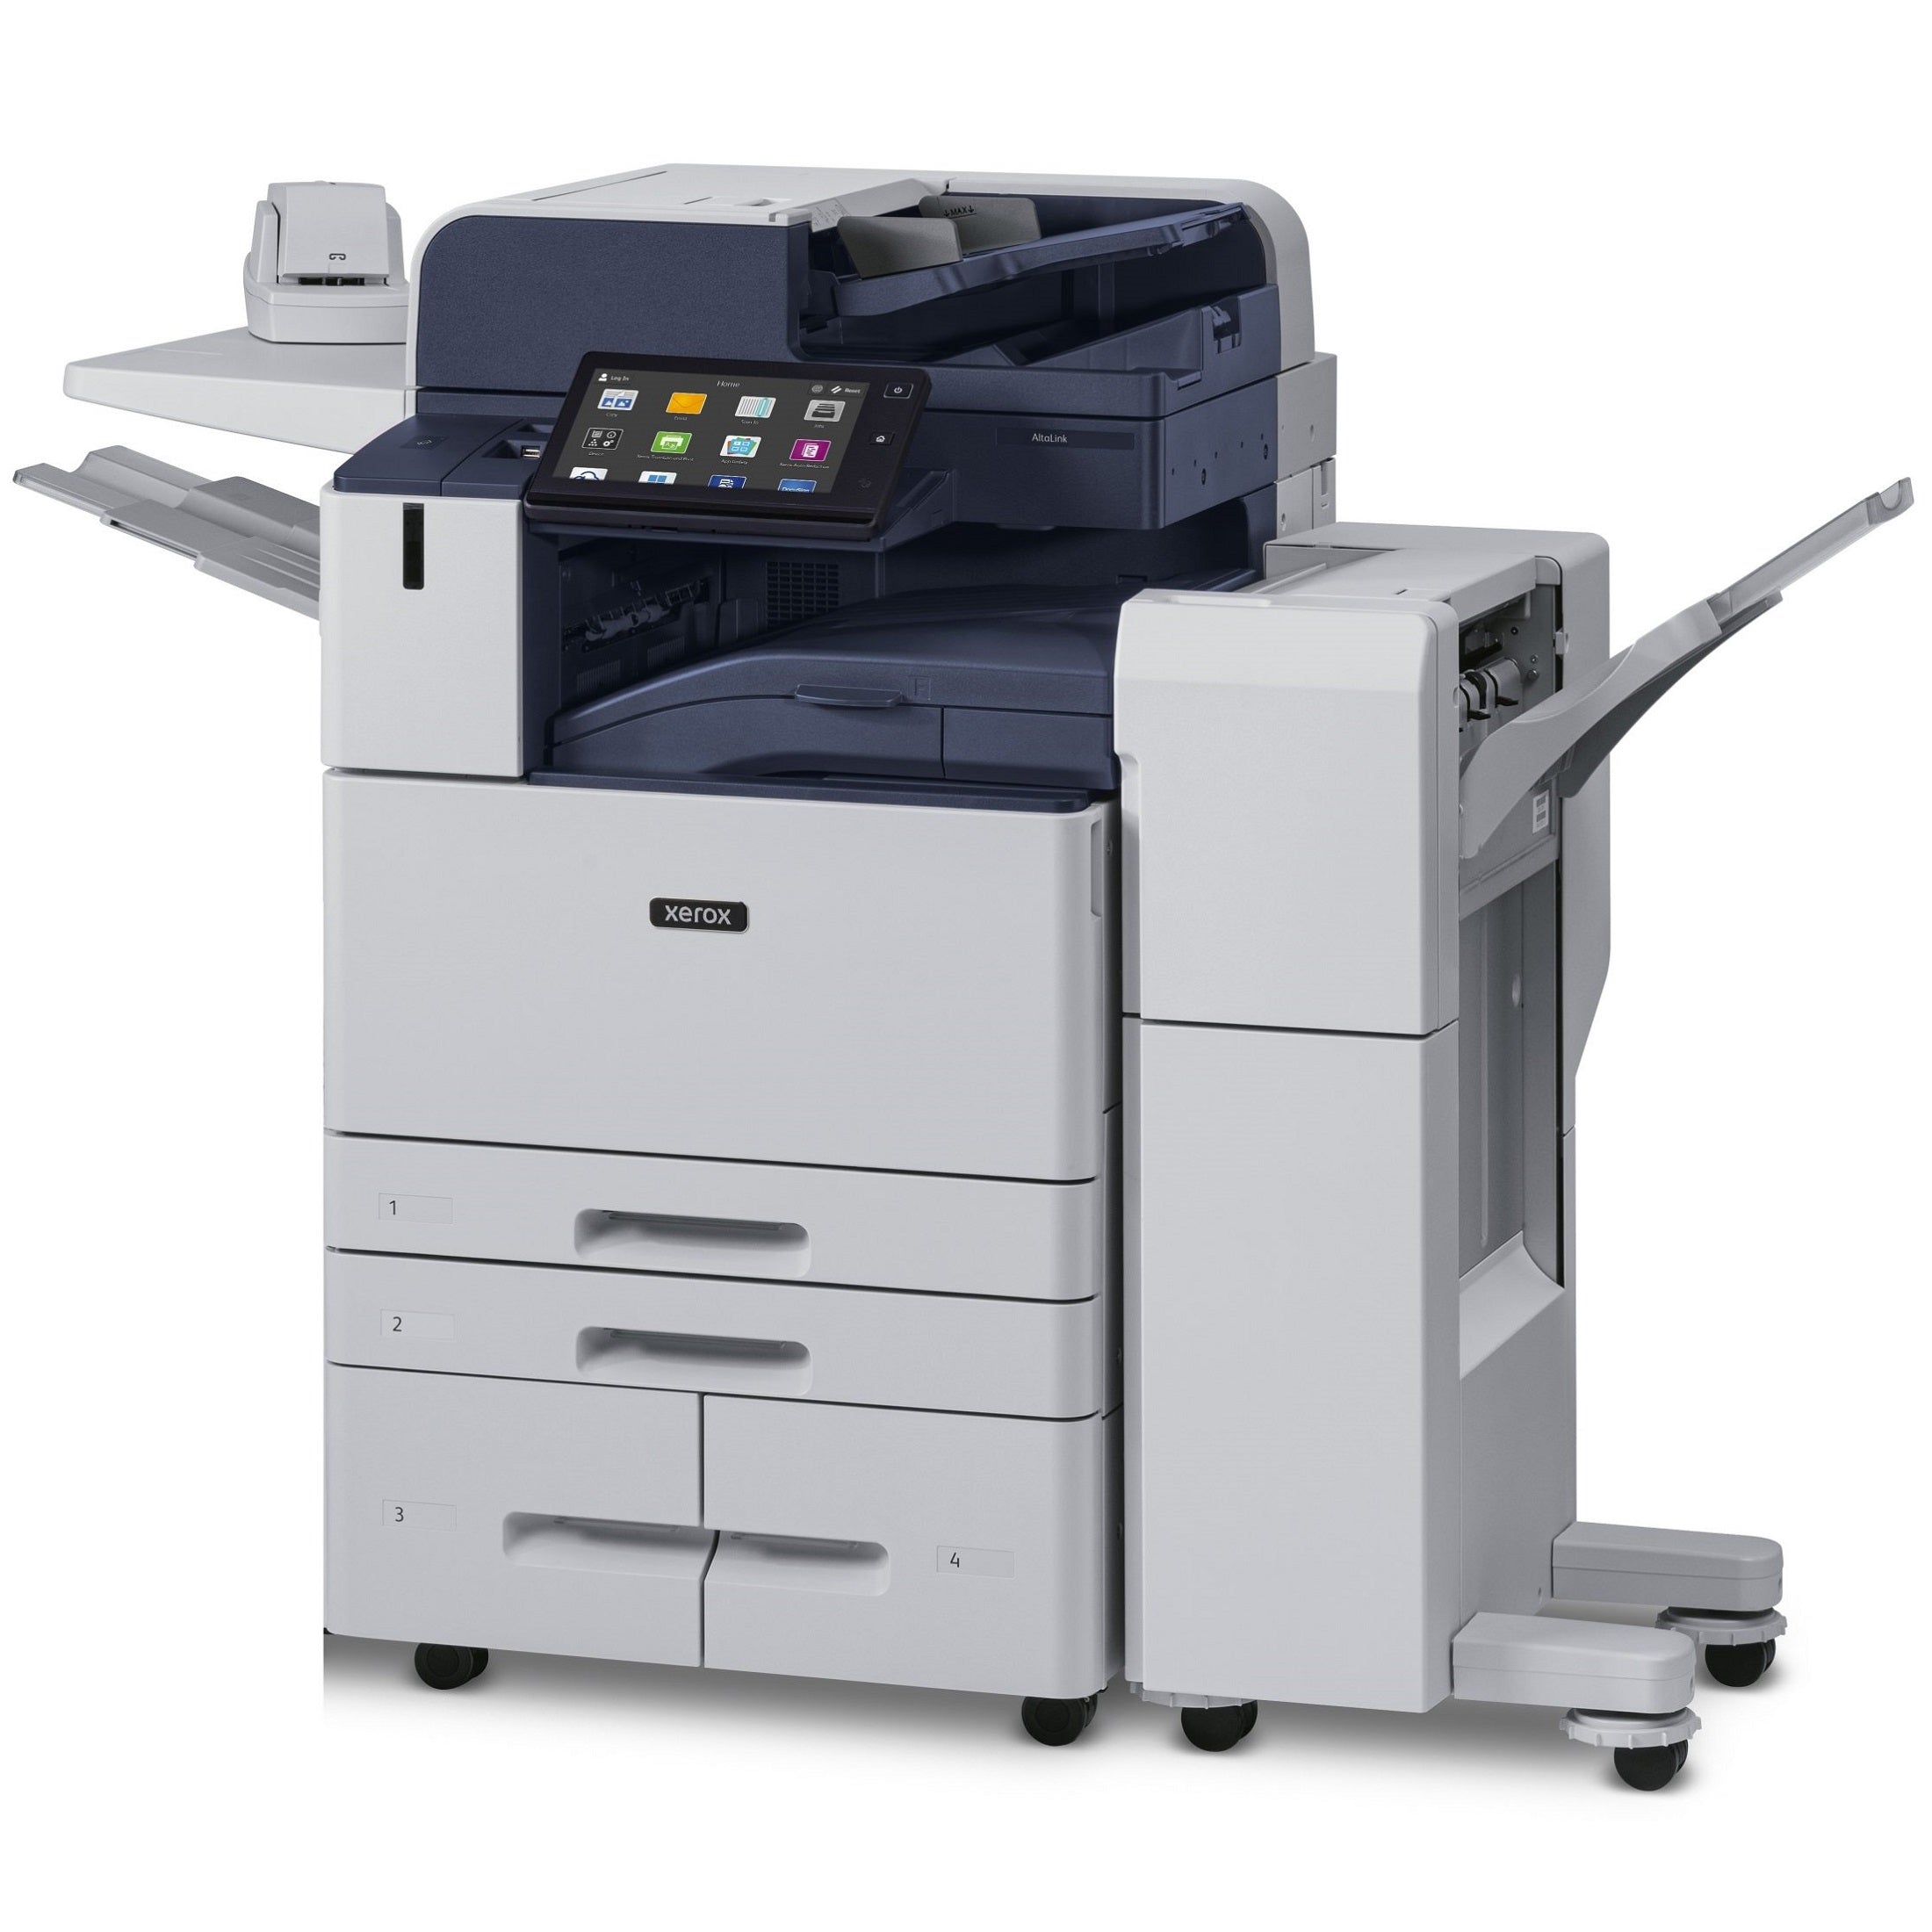 Now You Can Buy/Lease All-In-One Xerox AltaLink B8155 Monochrome Laser Printer (Copy, Email, Print, Scan) With Automatic Two-Sided Printing - Ideal For Mid To Large Work Groups